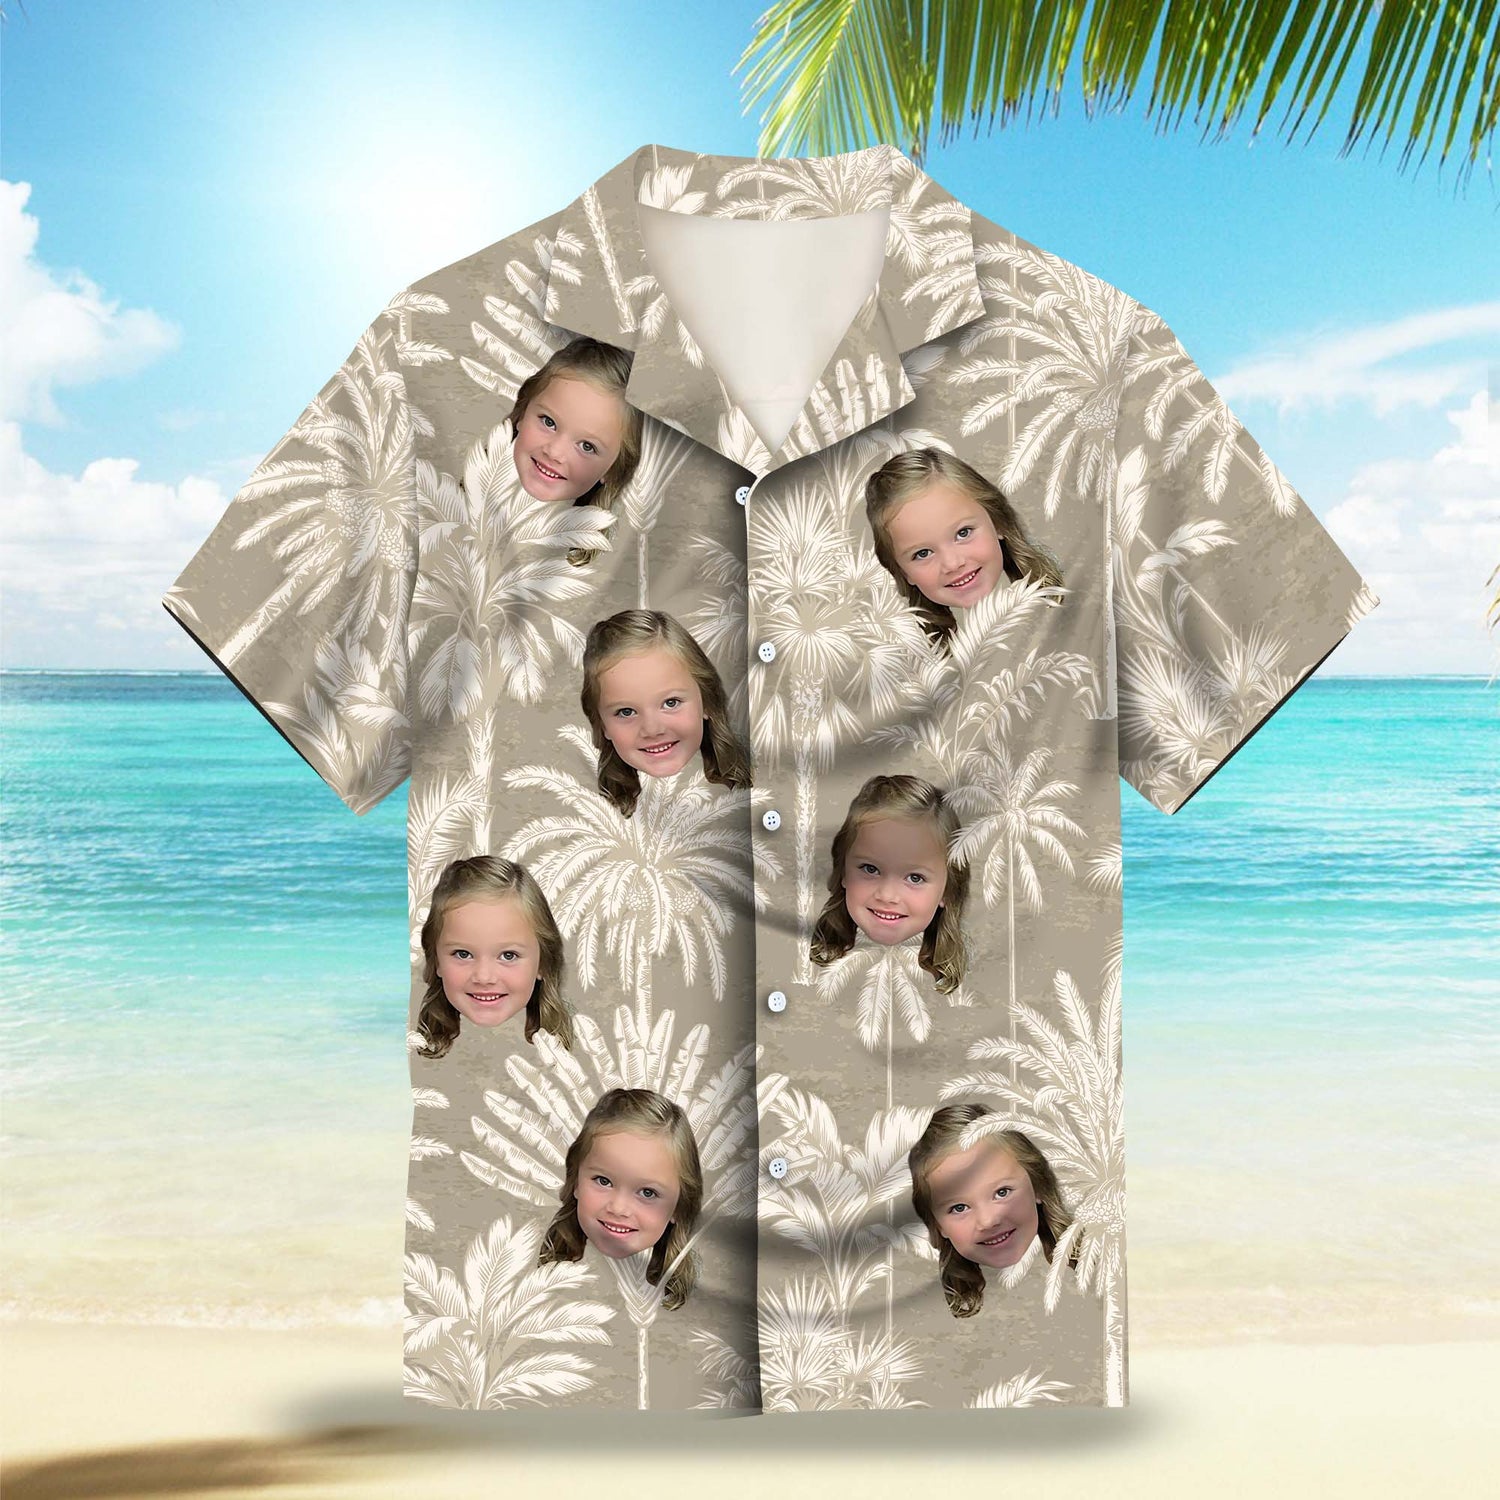 Tropical Tree in Cotton Grey and Ivory Custom Hawaiian Shirt. Featuring a stylish tropical tree design in a monochrome color palette of cotton grey and ivory, perfect for a classic Hawaiian look.